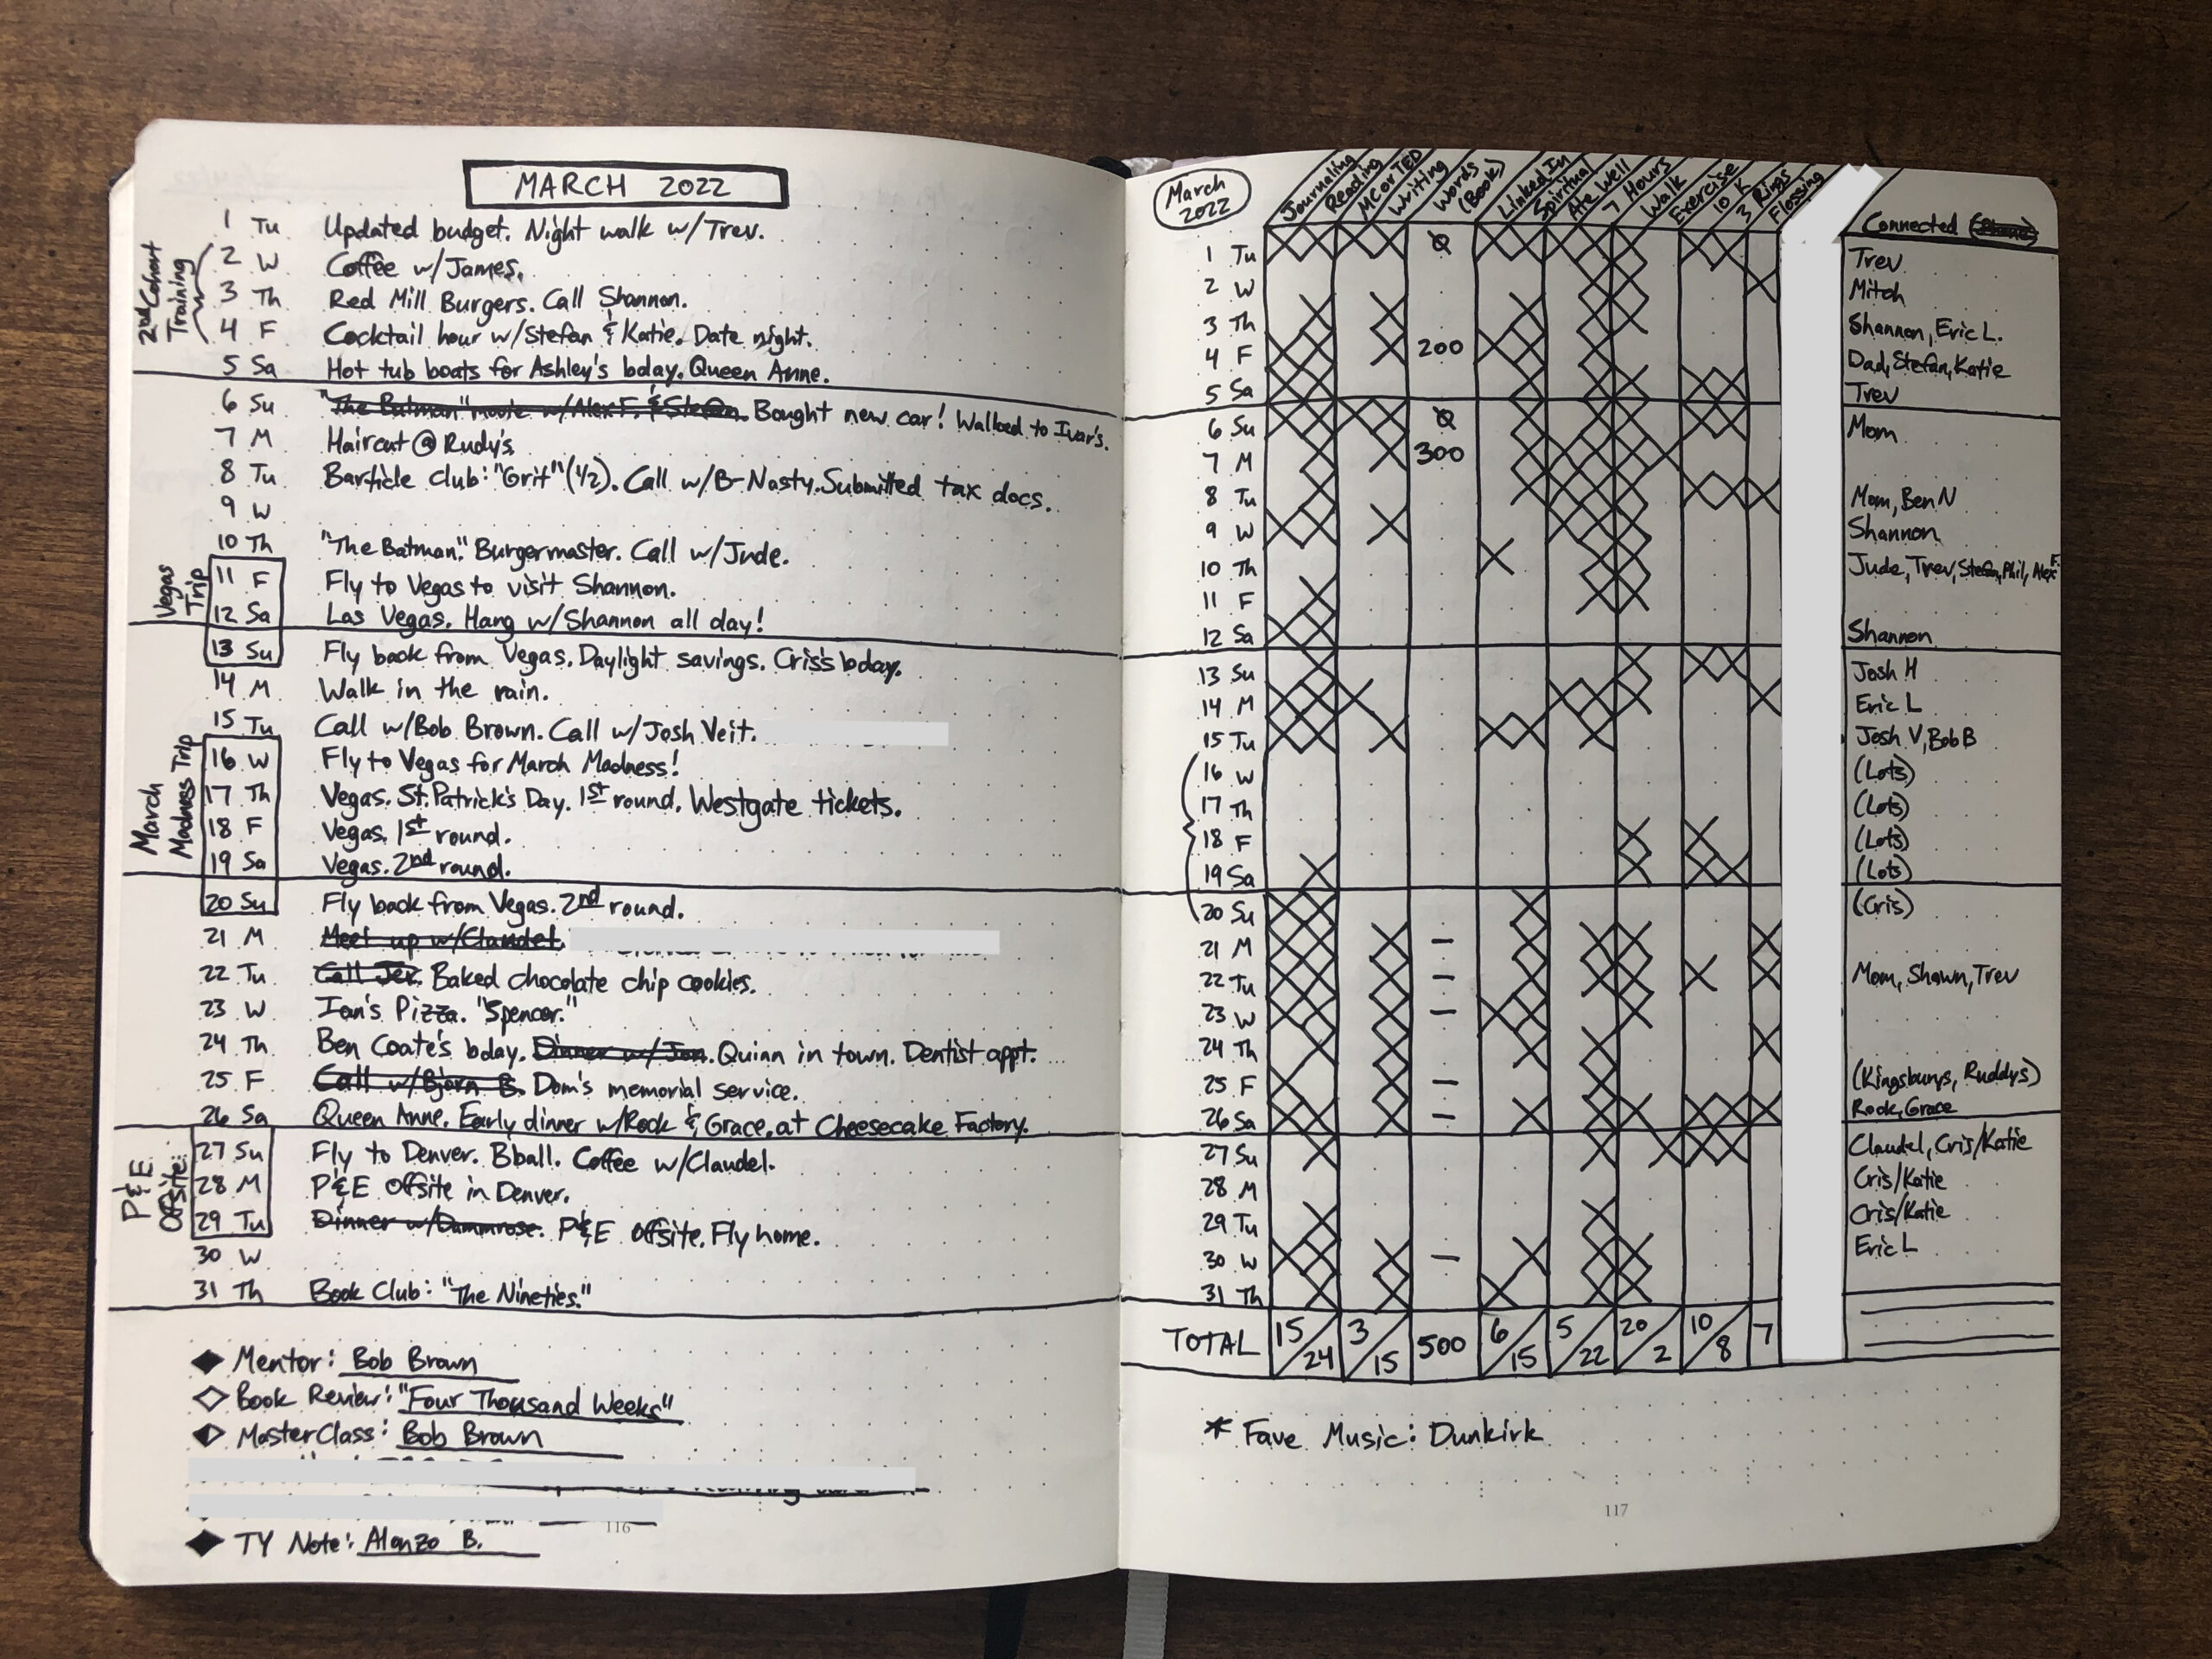 Bullet Journal Inspiration: Organize and Express Yourself